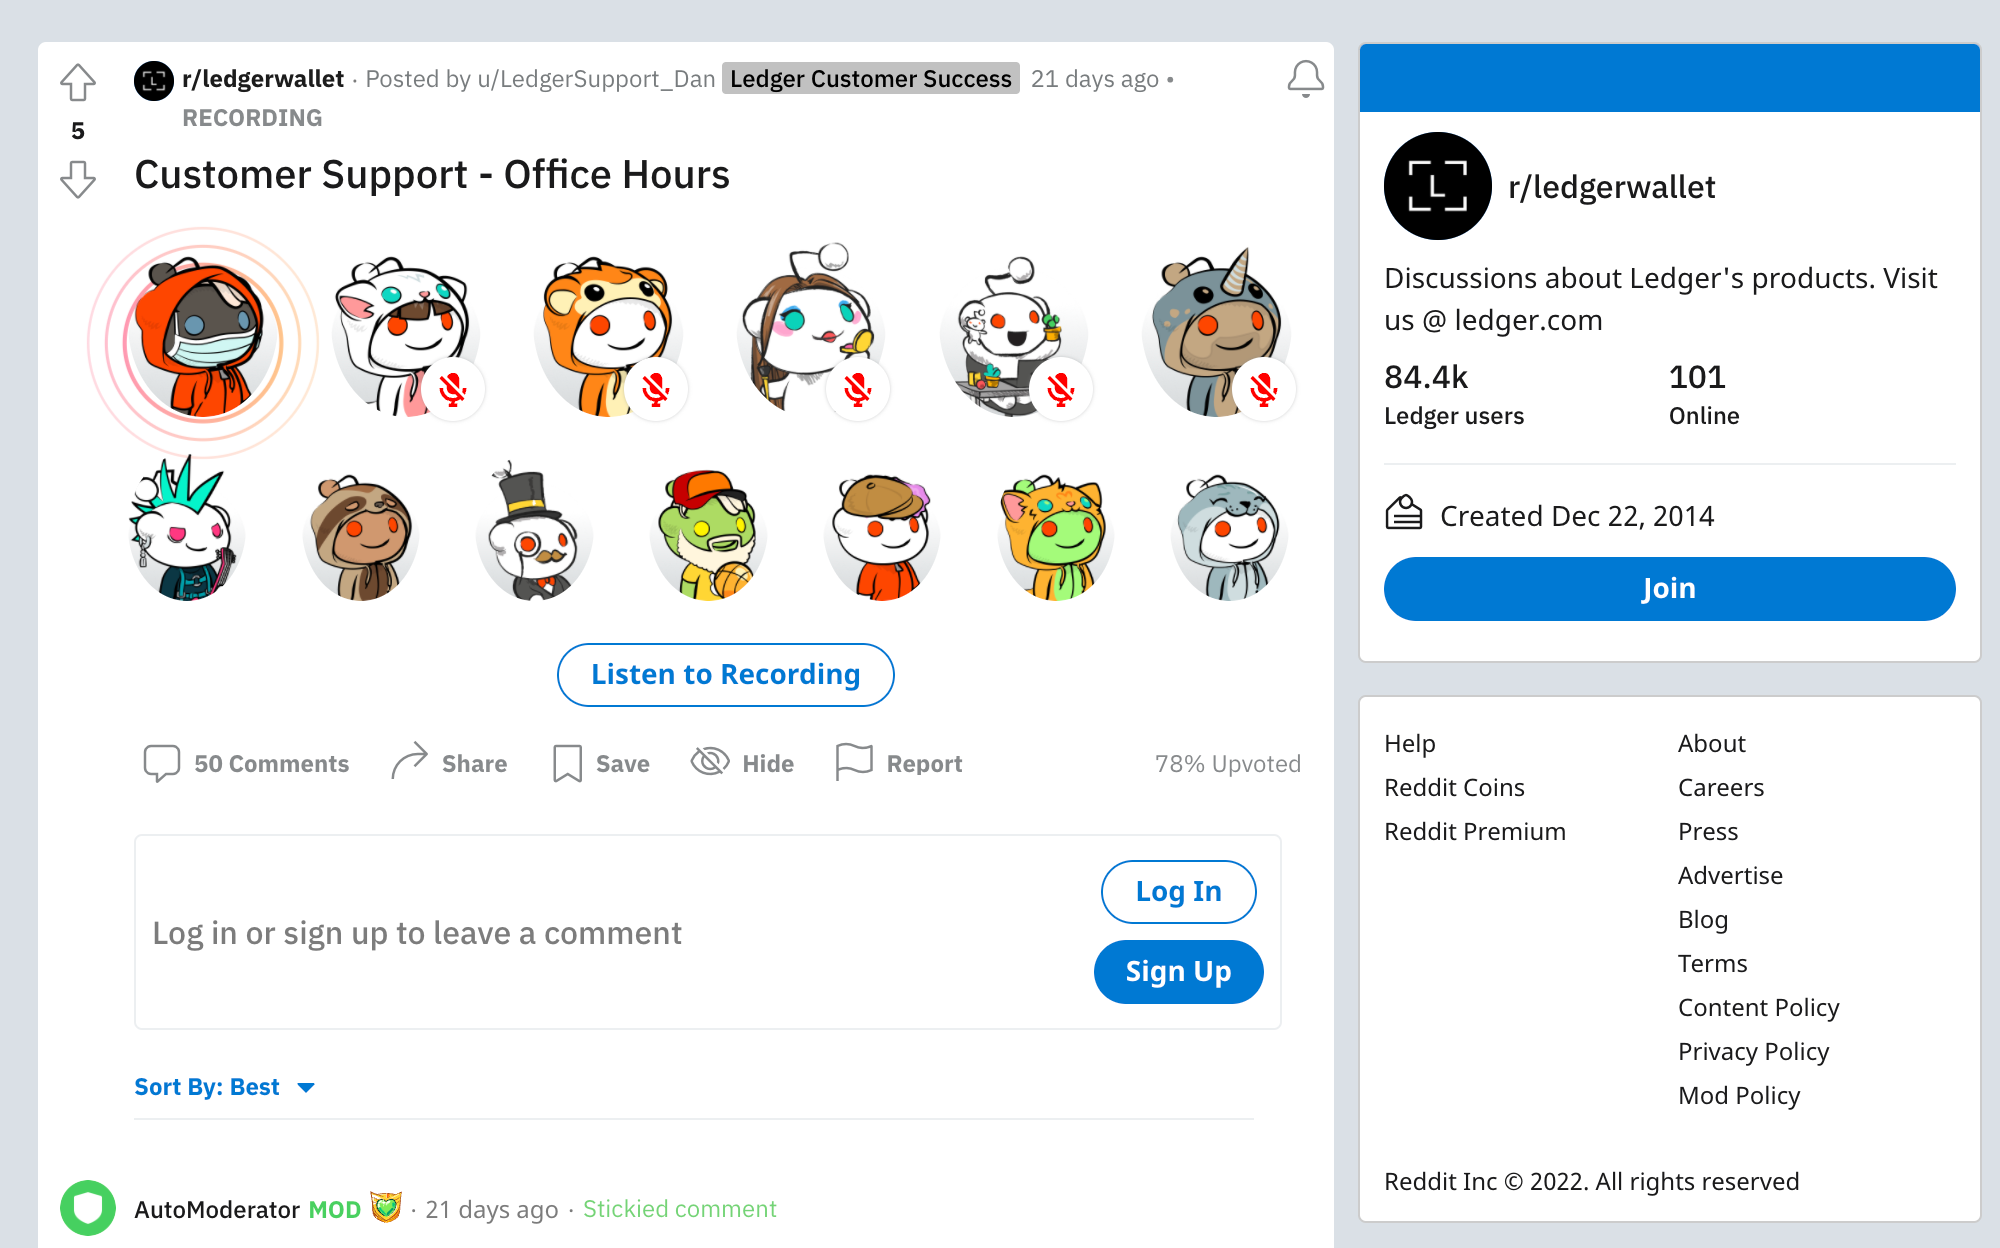 Reddit Marketing for Games: How to Get Organic Results